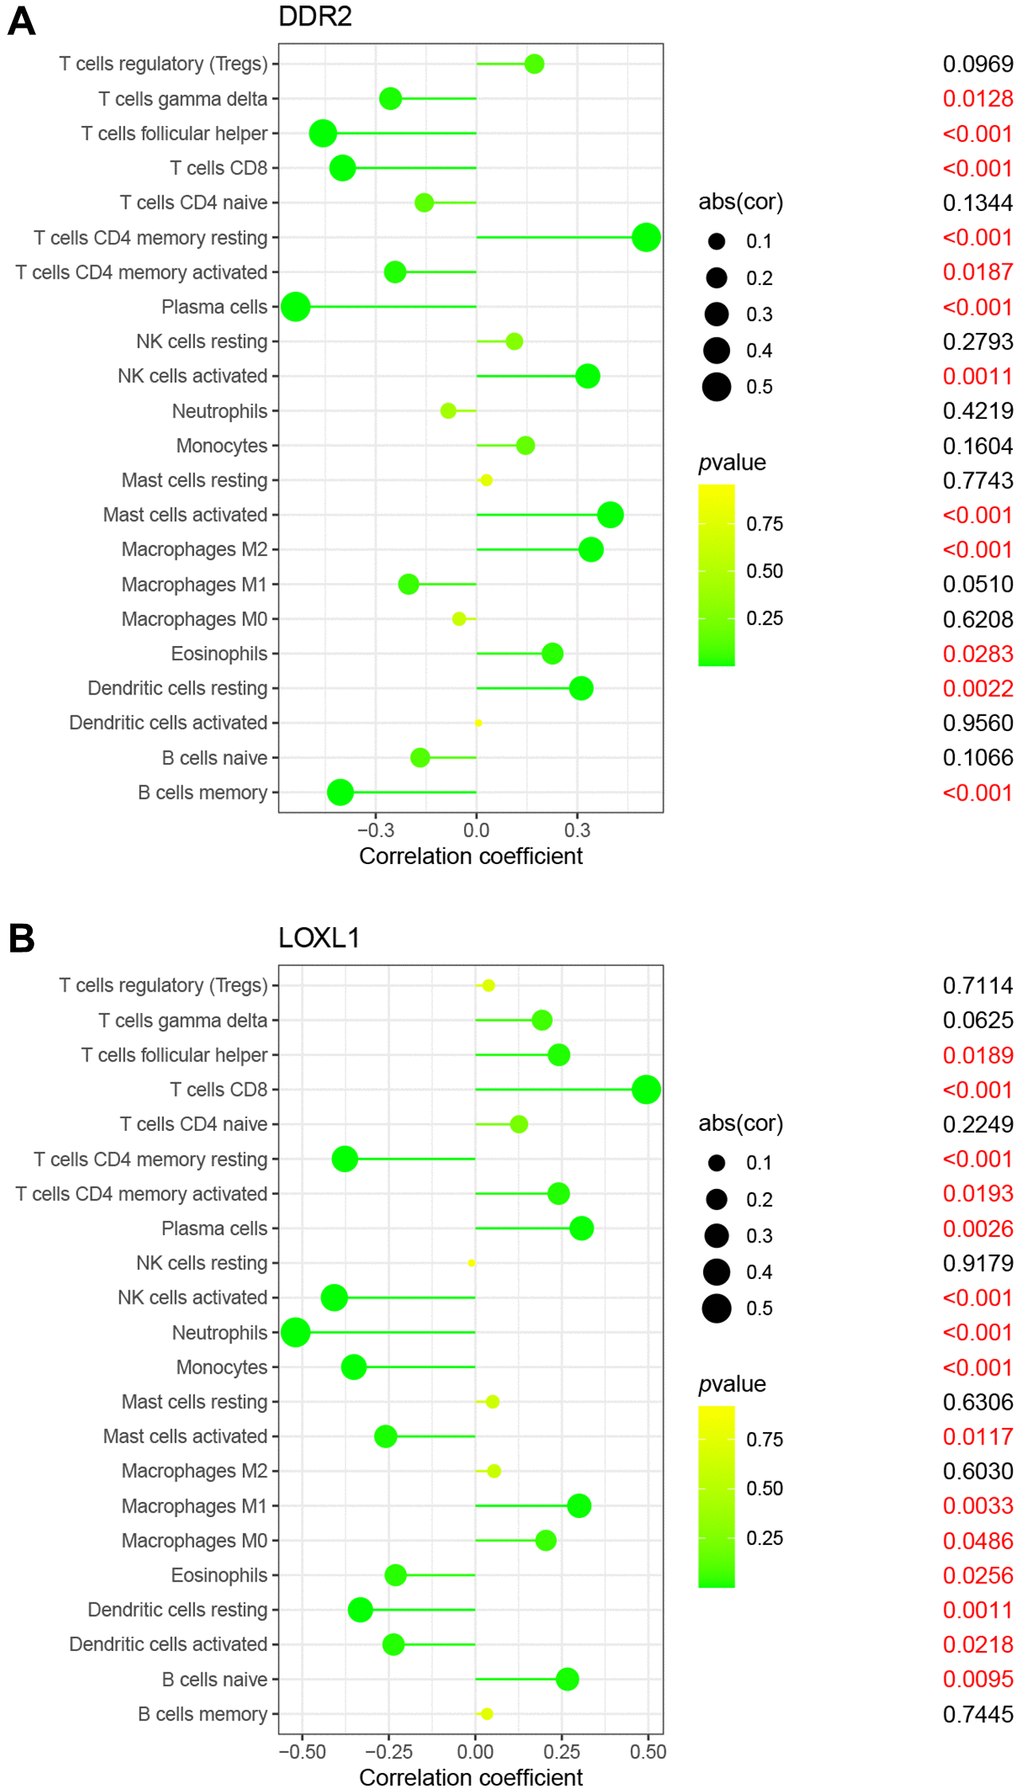 Correlation between DDR2 (A), LOXL1 (B), and infiltrating immune cells in RA and normal samples.